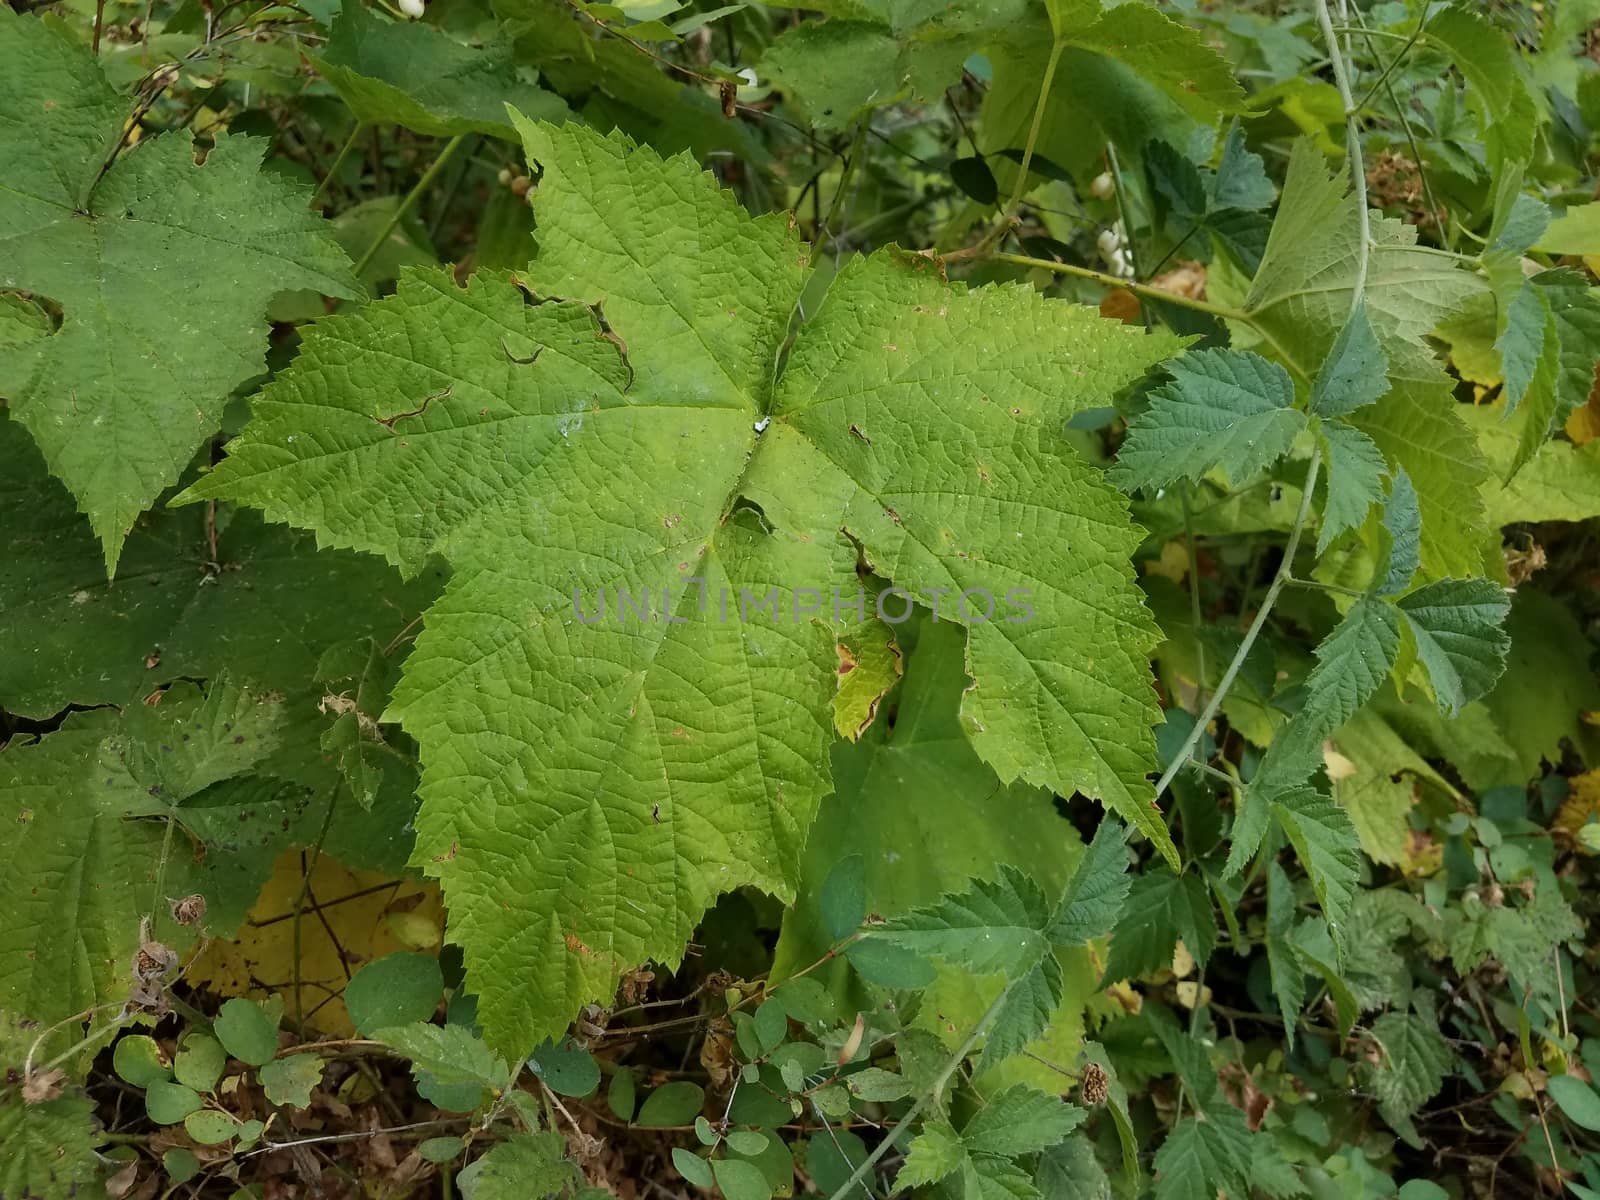 large green leaf on plant and vines outdoor by stockphotofan1